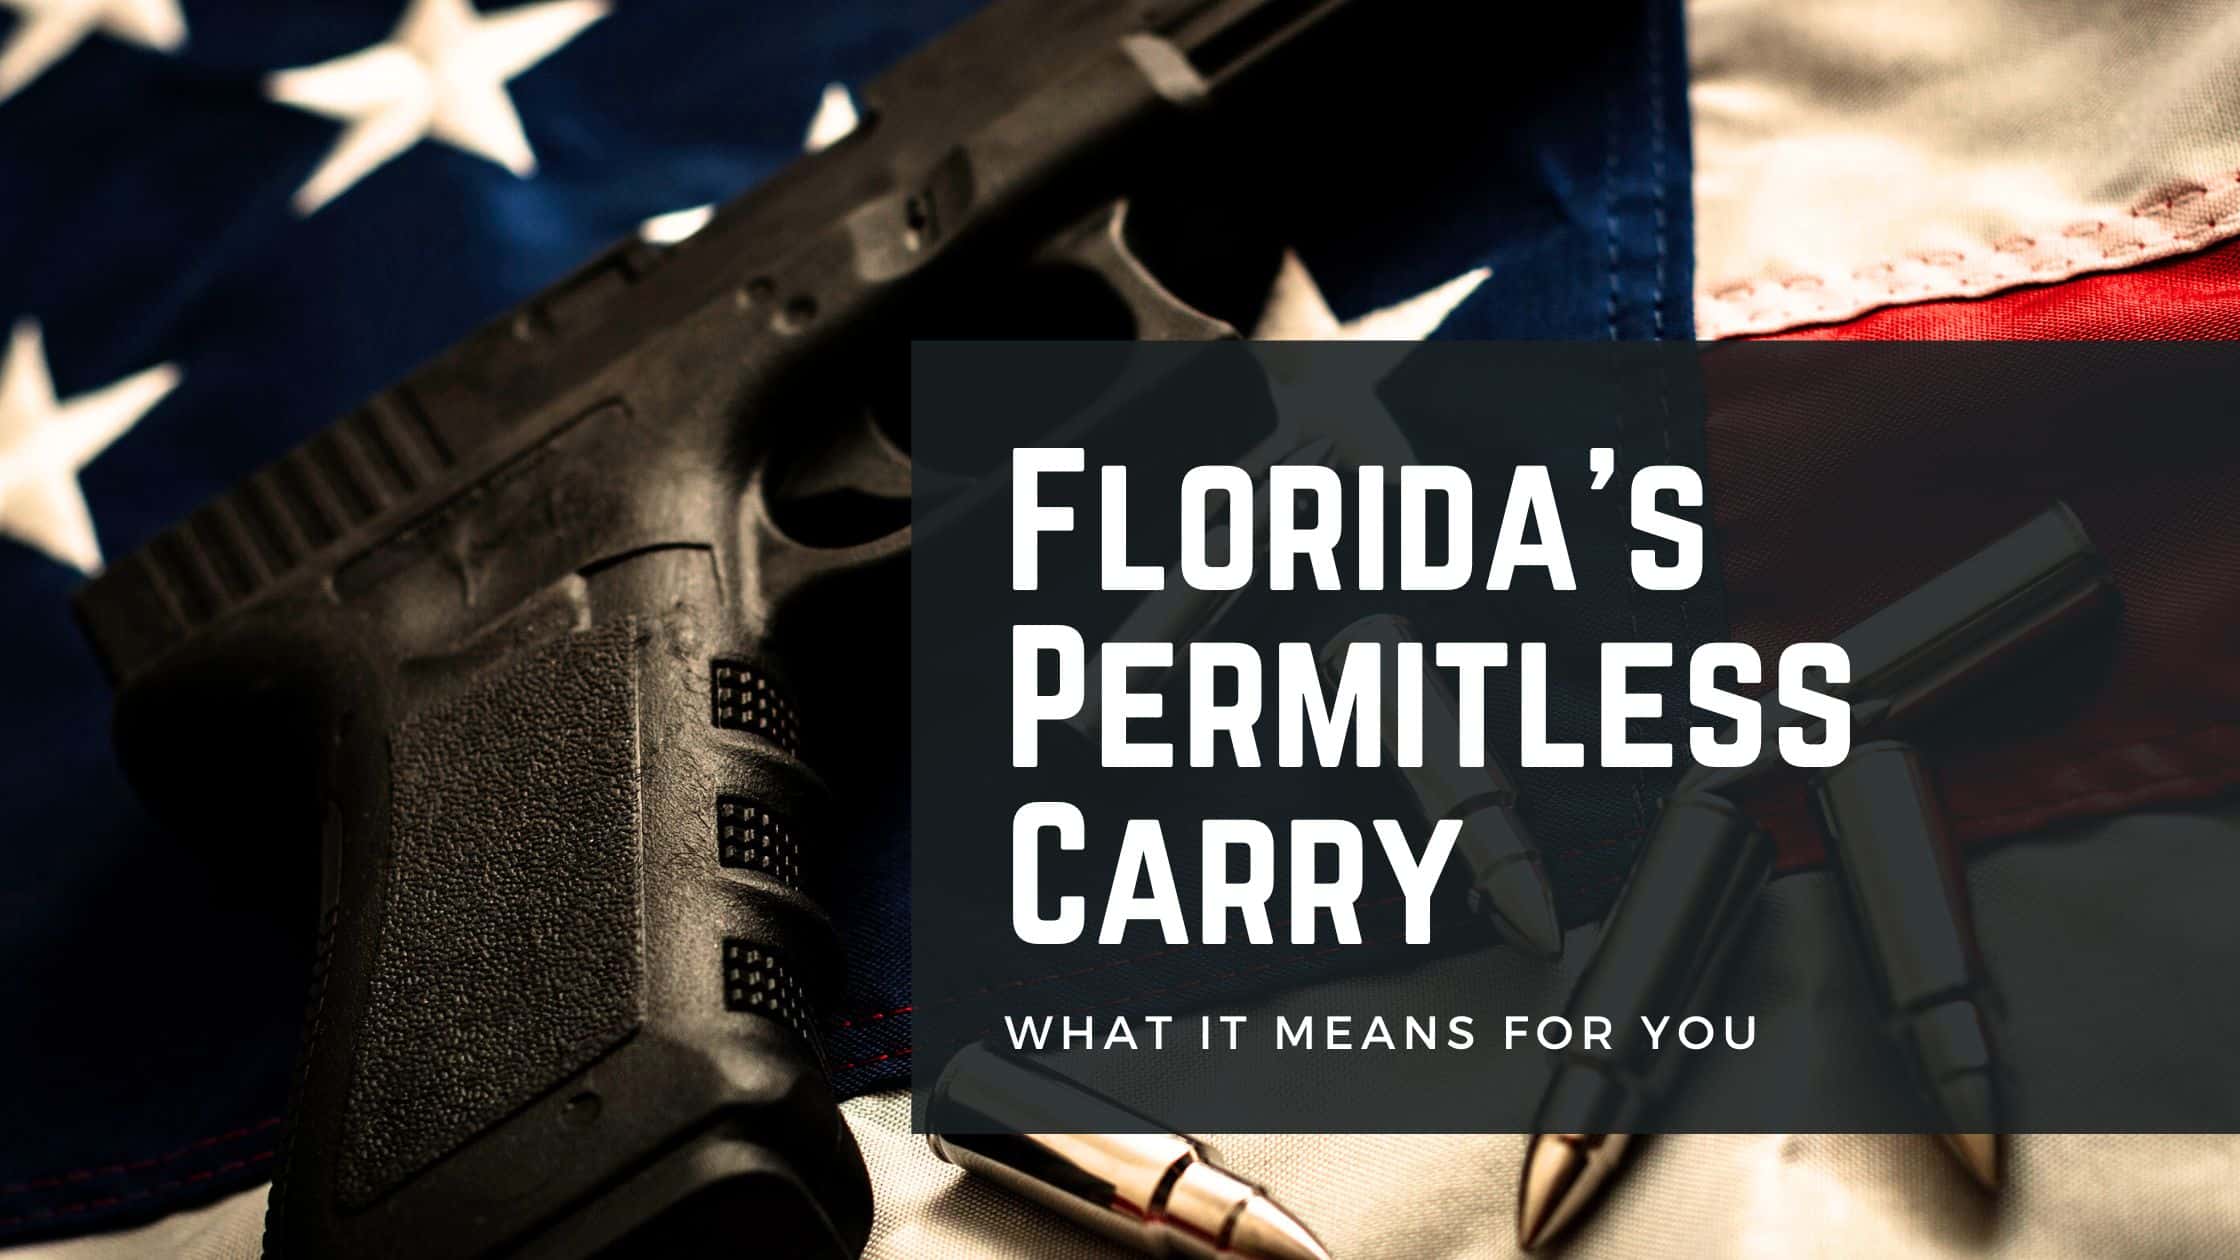 Florida Permitless Carry in Florida, a new law that outlines the constitutional right to carry a concealed weapon and the regulations surround it for the state of Florida